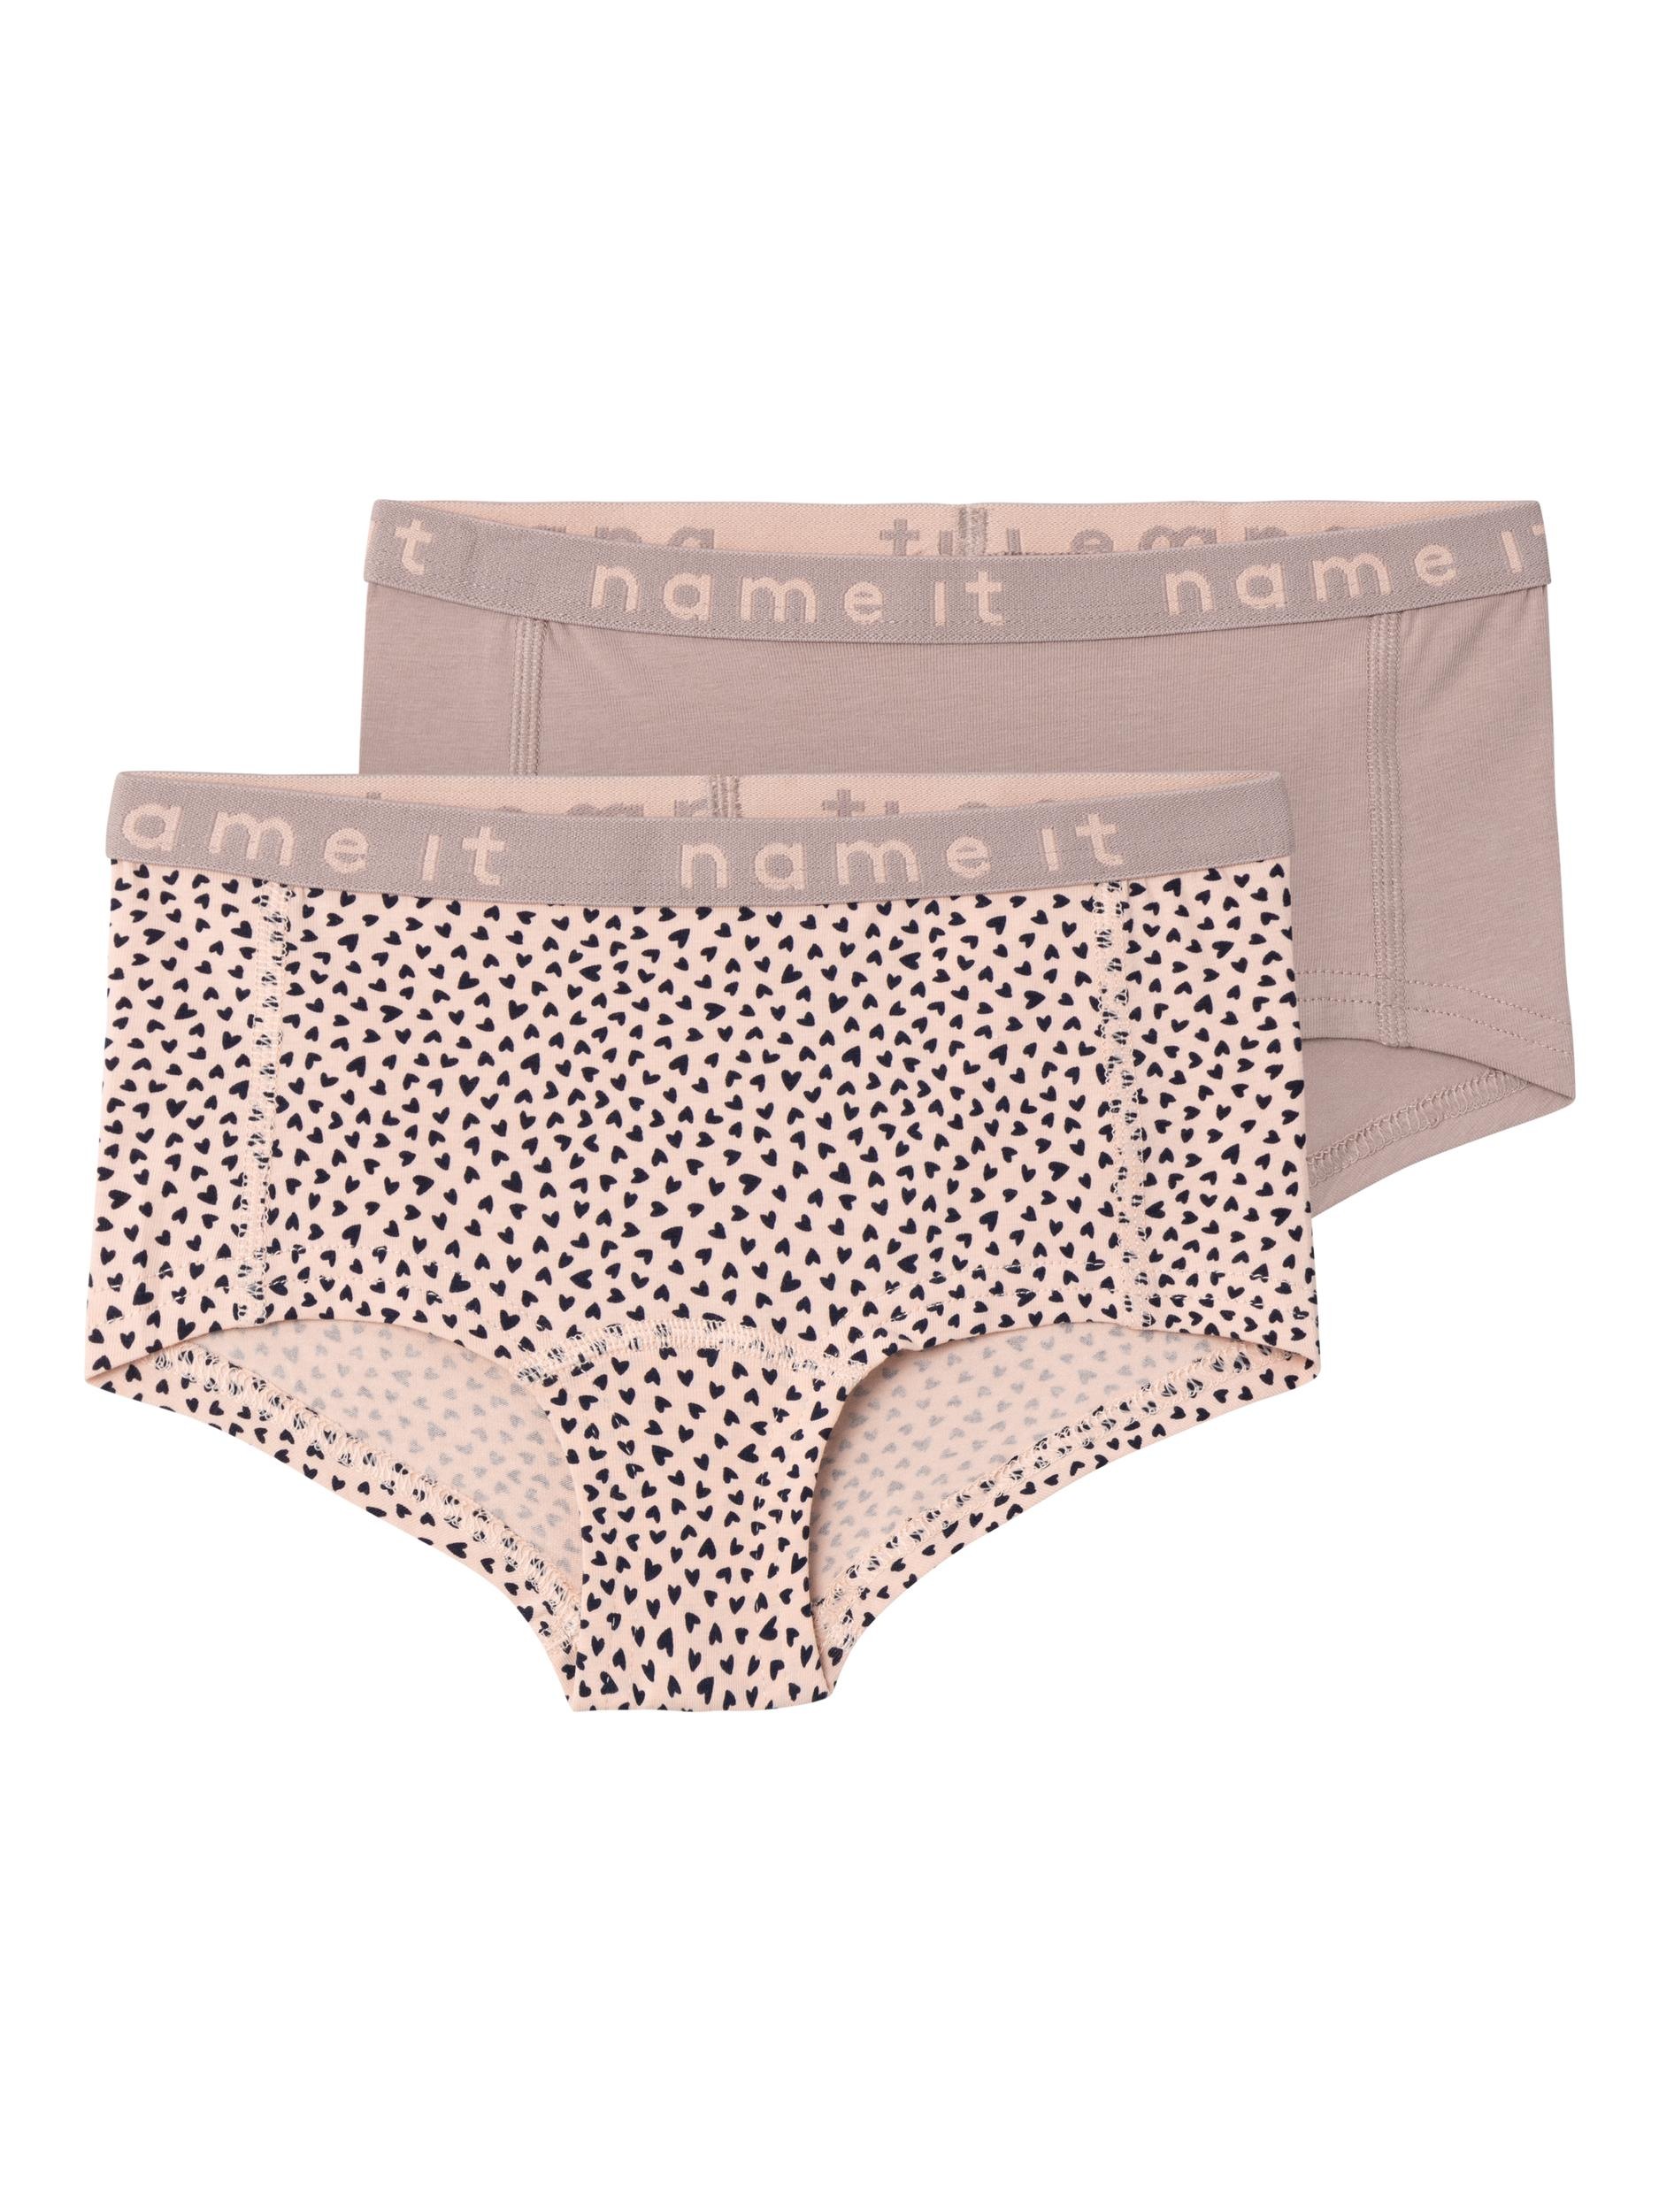 Name It Hipster HEARTS bei (Packung, St., NOOS«, SAND 2er Pack) EVENING 2 2P OTTO »NKFHIPSTER